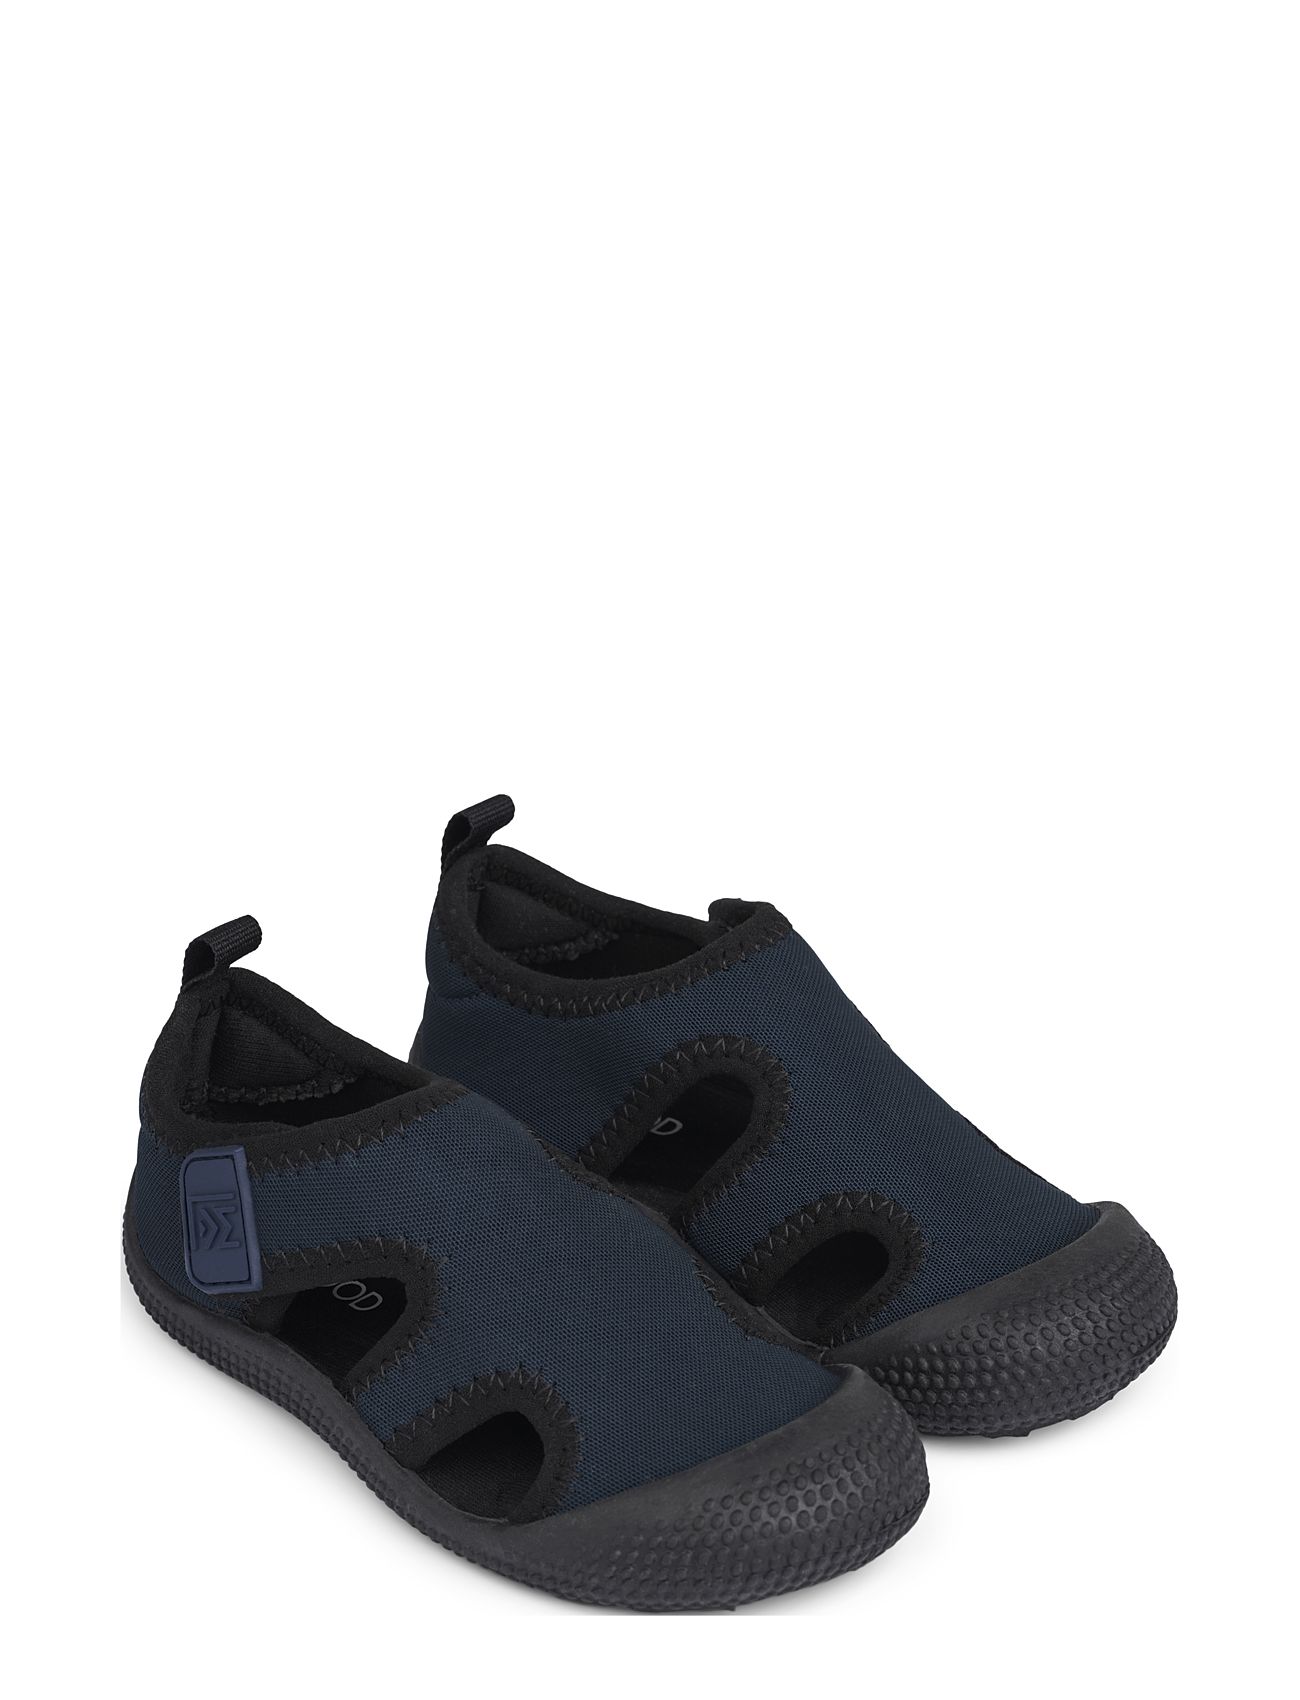 Sigurd Sea Shoe Shoes Summer Shoes Water Shoes Navy Liewood